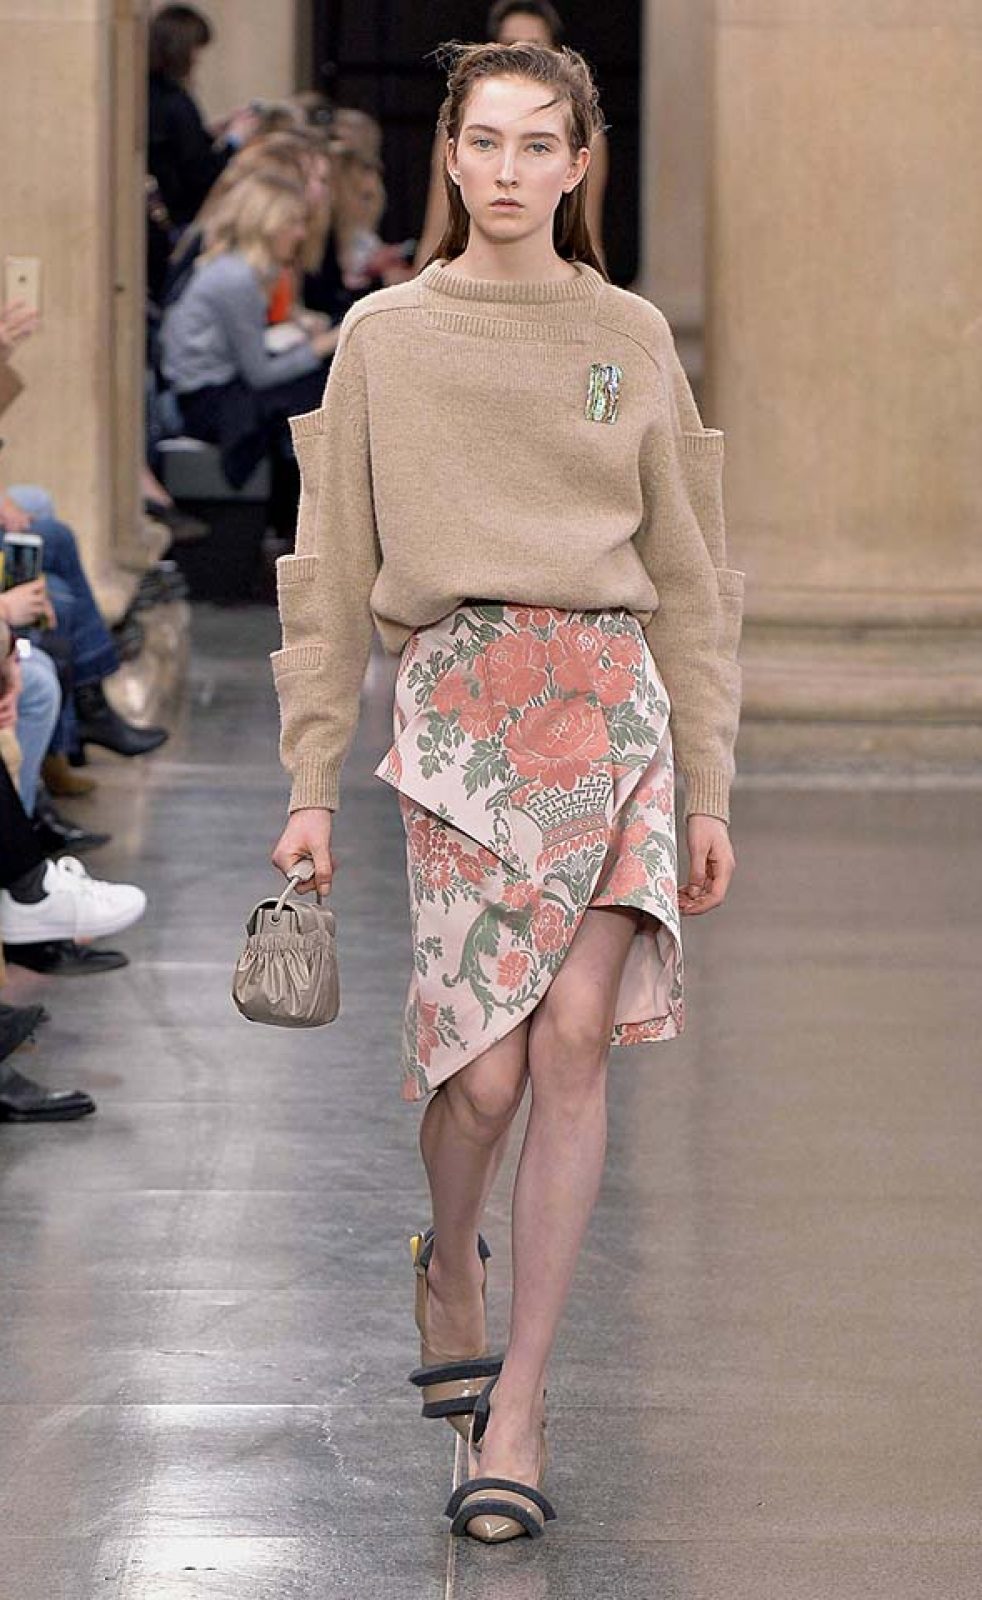 christopher-kane-fw17-rtw-fall-winter-2017-18-collection-2-floral-dress-sweater